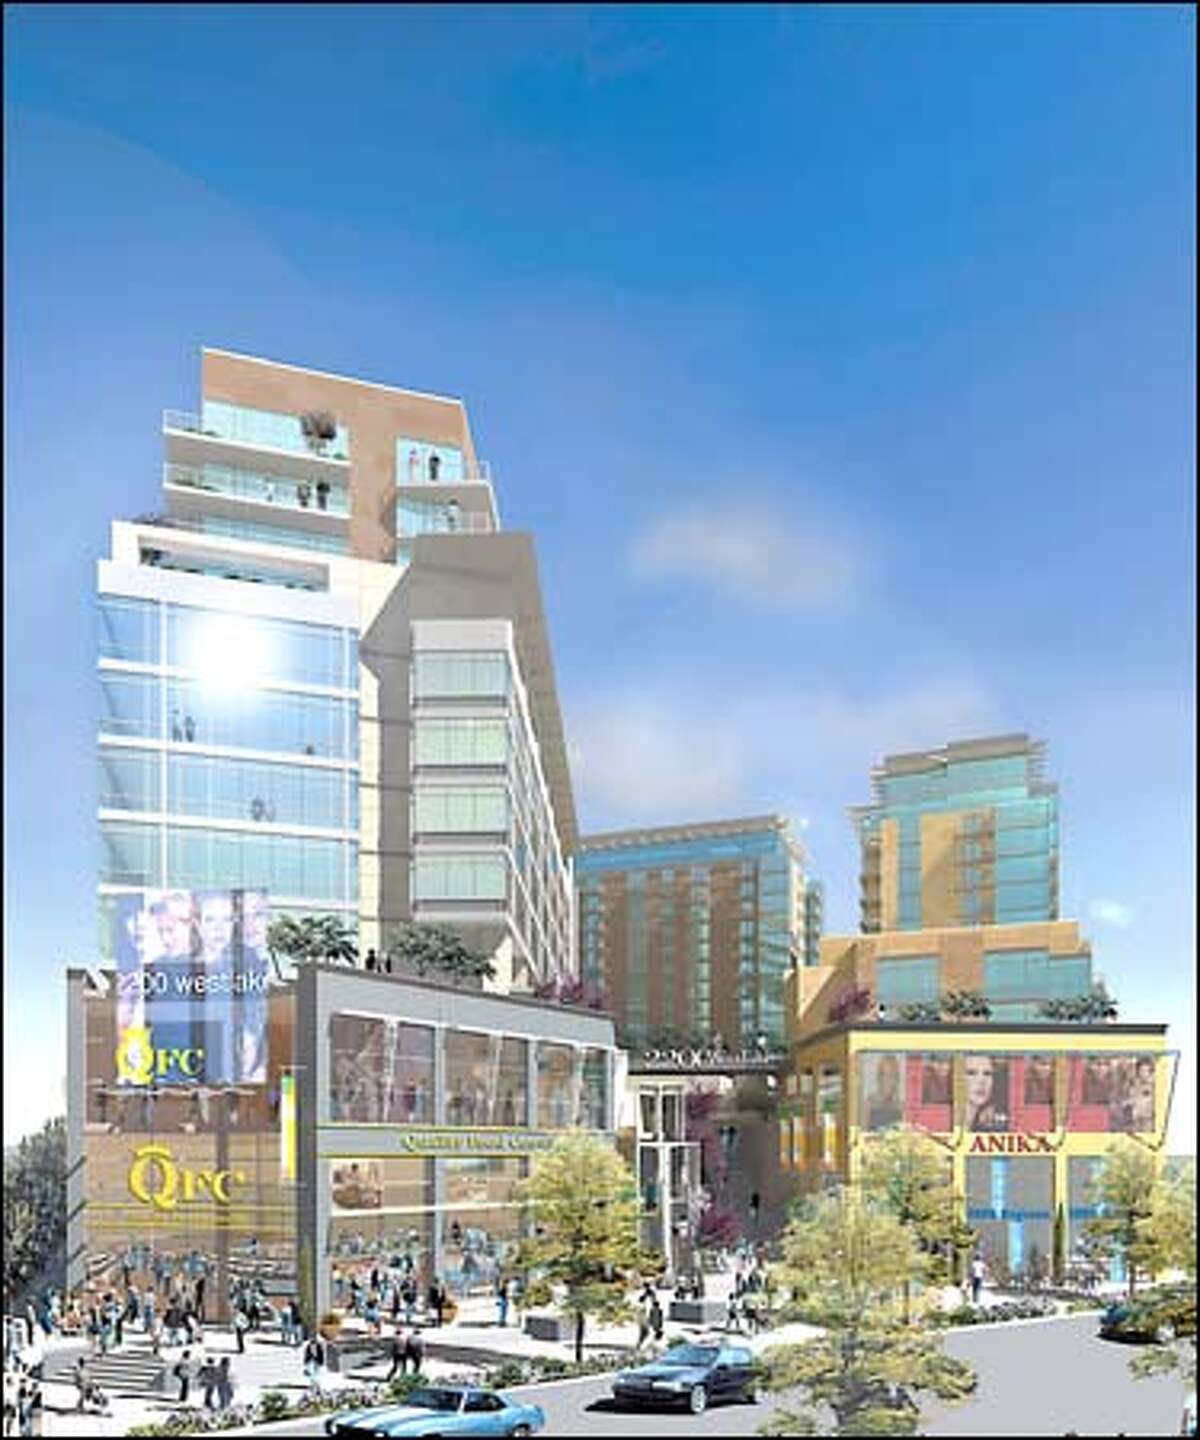 This is an artist's rendering of the residential and business development planned for 2200 Westlake Ave.